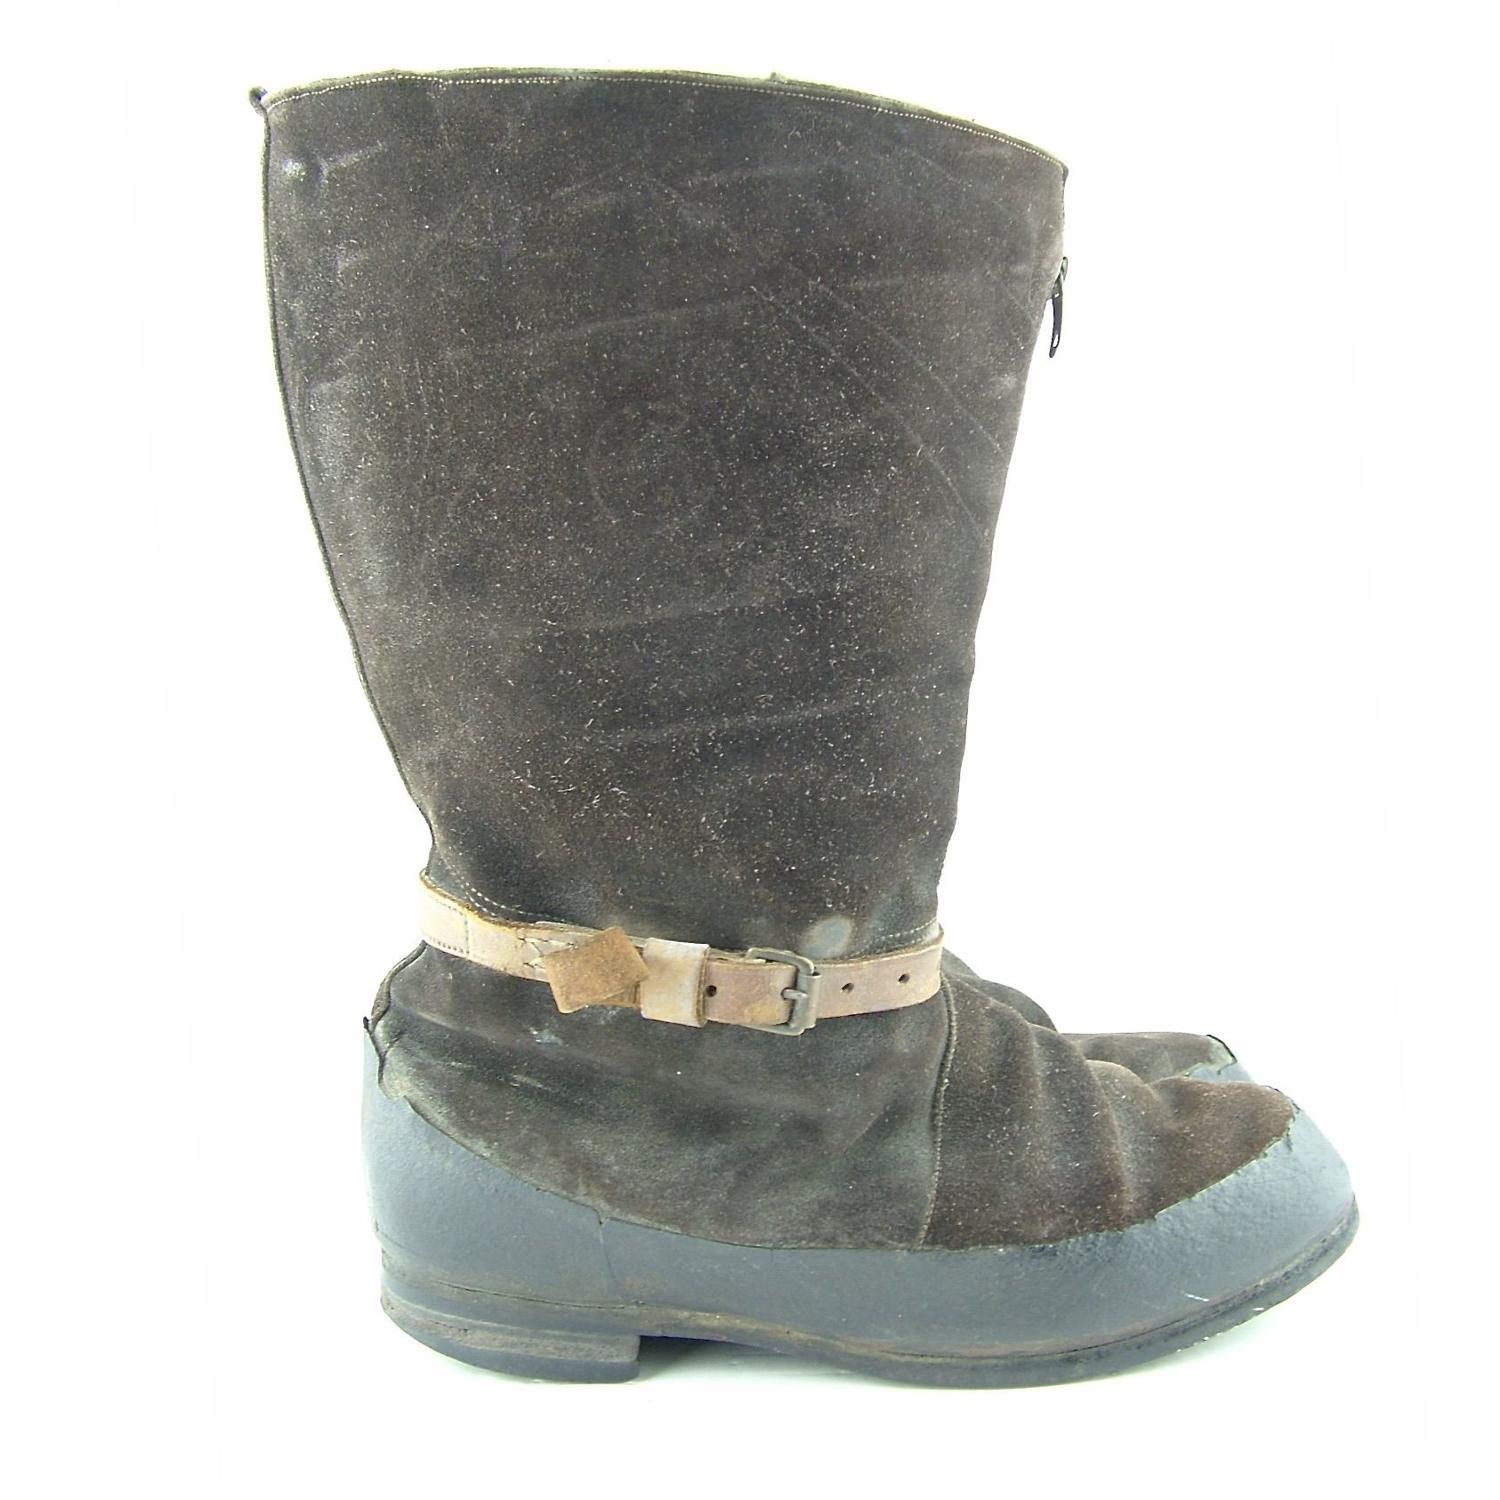 RAF 1941 pattern flying boots